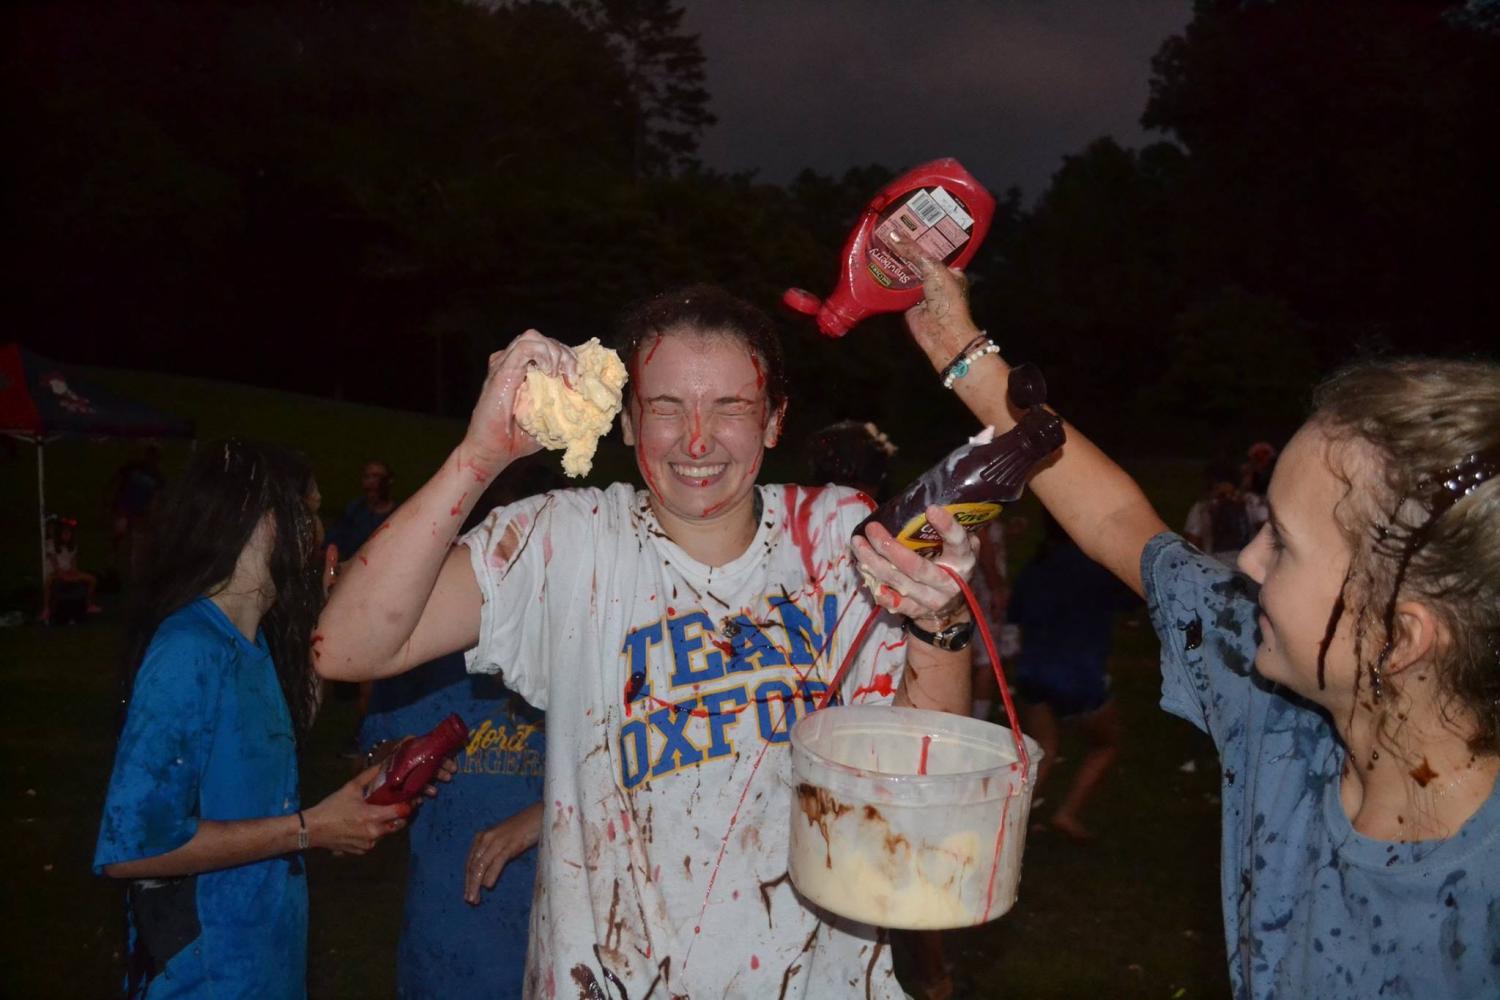 Junior+Taylor+Daniel+squirts+senior+Lily+Mitchell+with+syrup+during+the+ice+cream+olympics+on+Aug.+17+hosted+by+Oxford+Younglife.